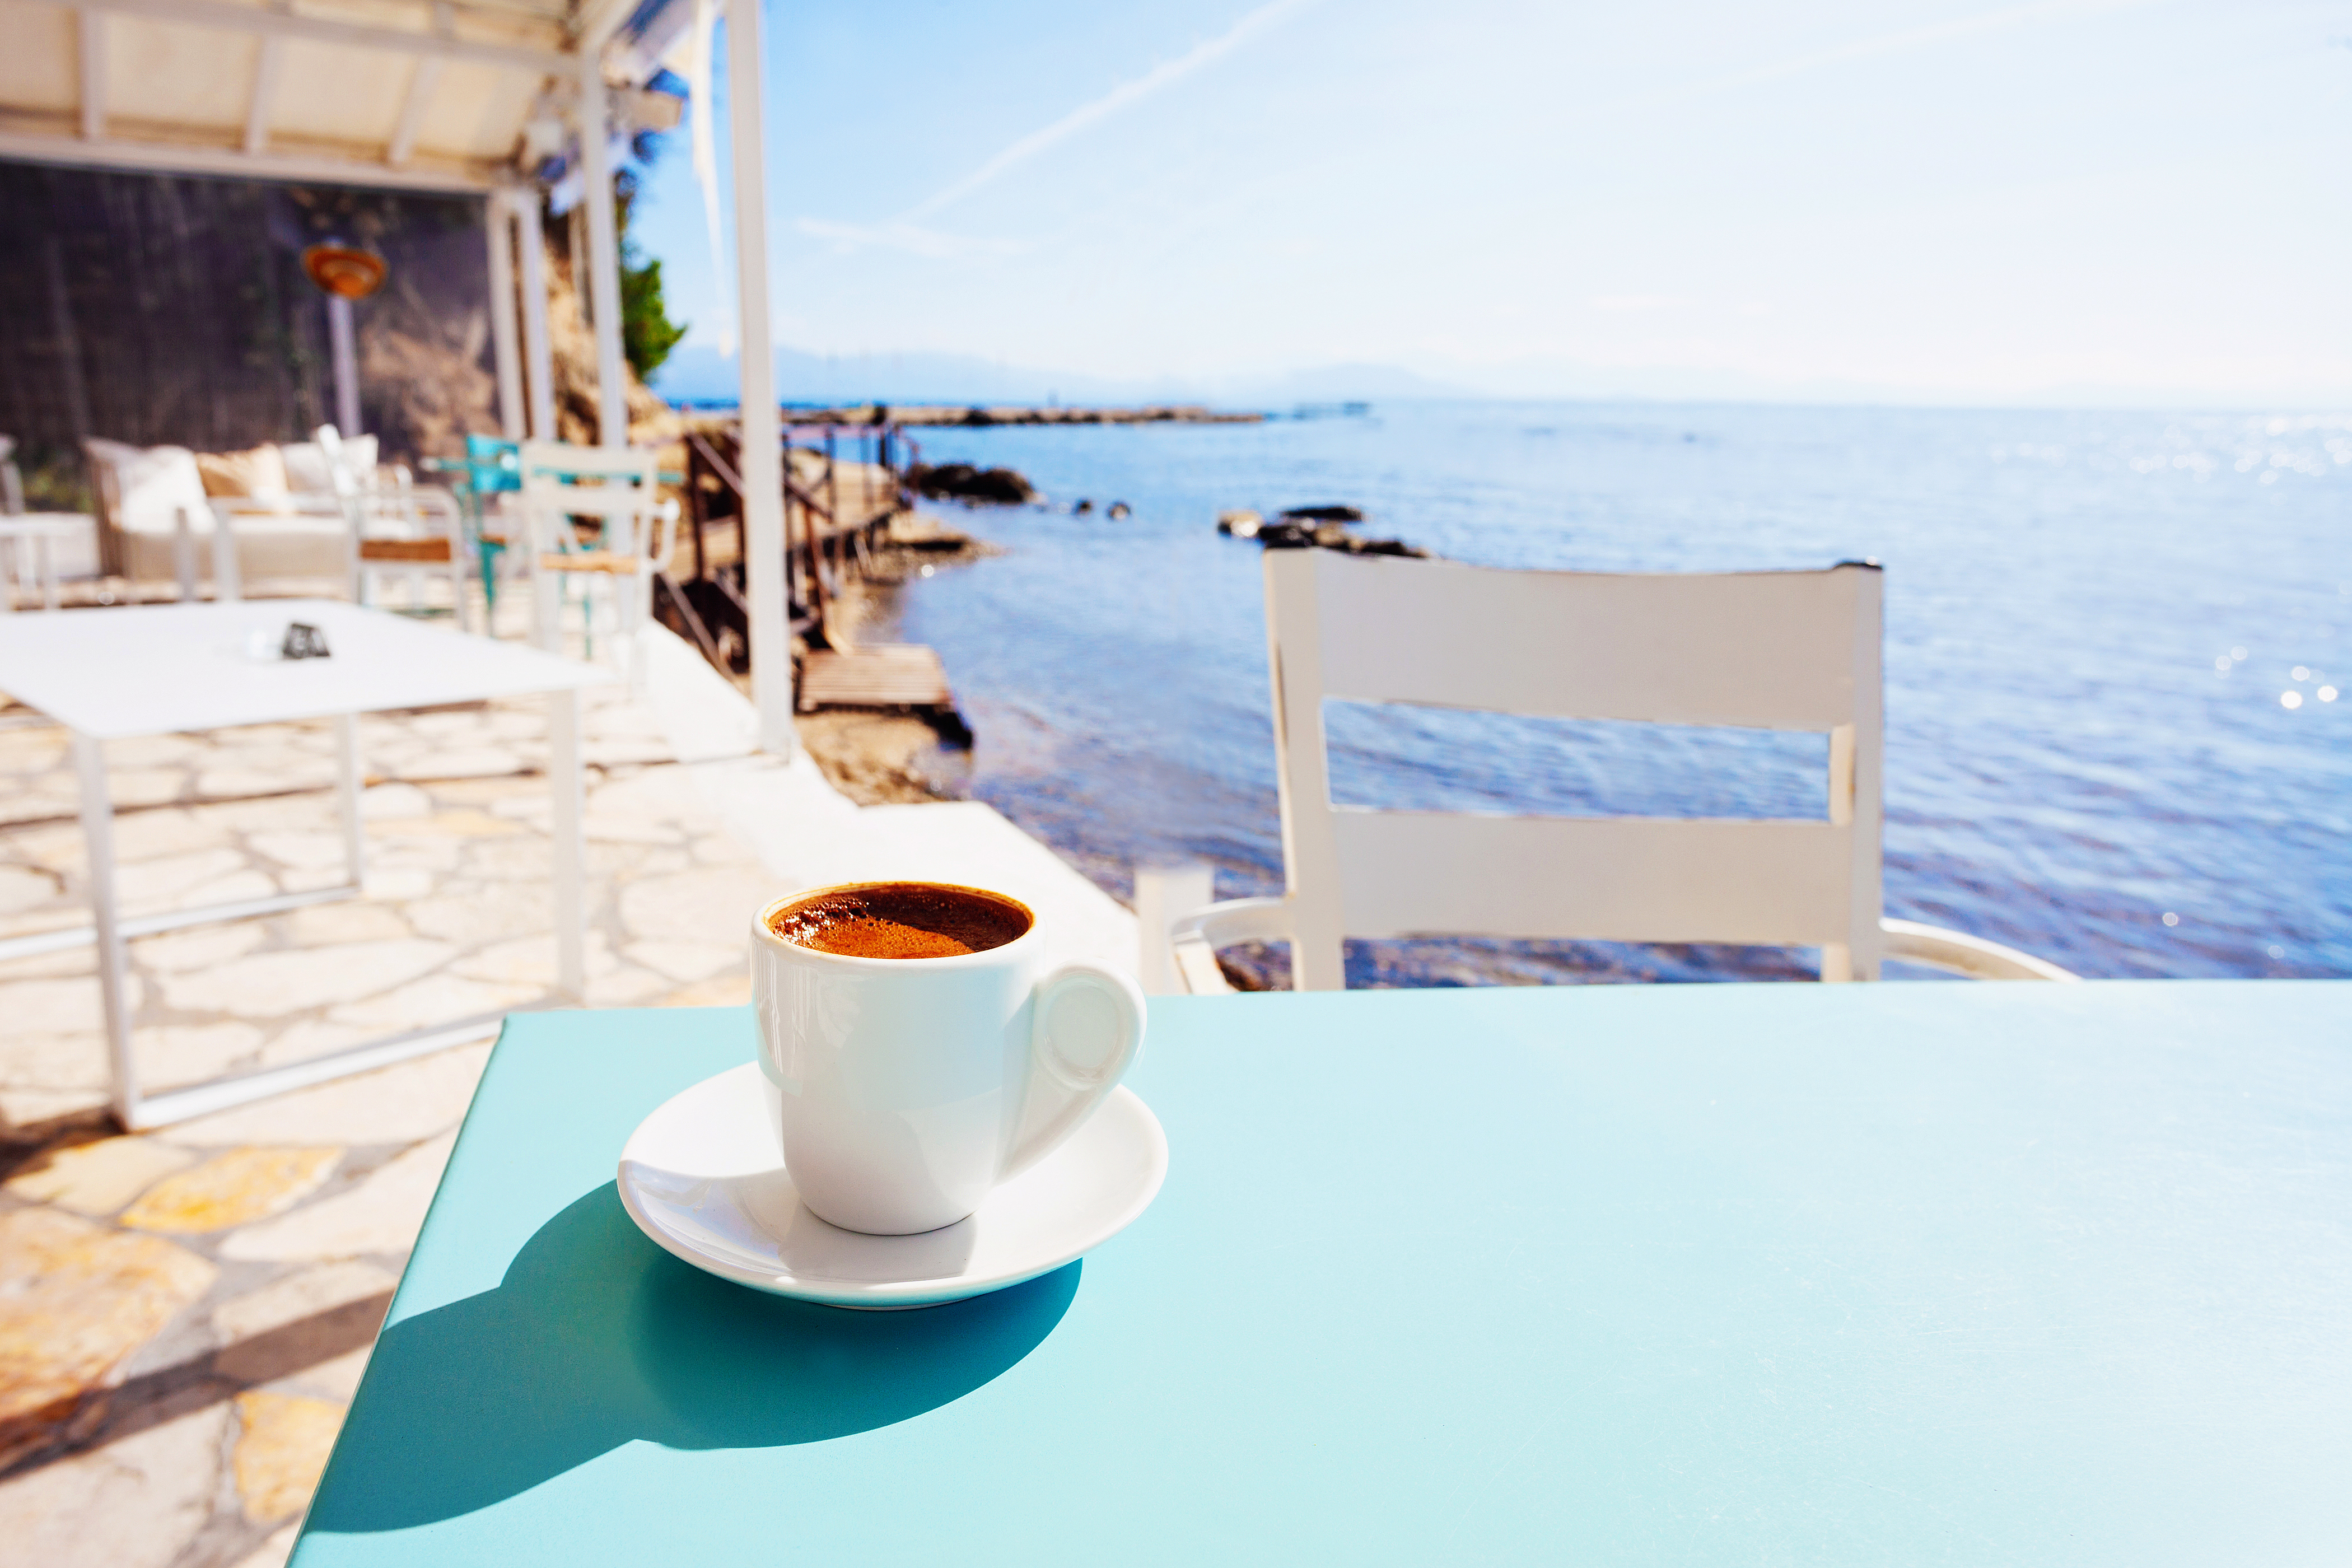 How to Order Coffee in the Greek Language